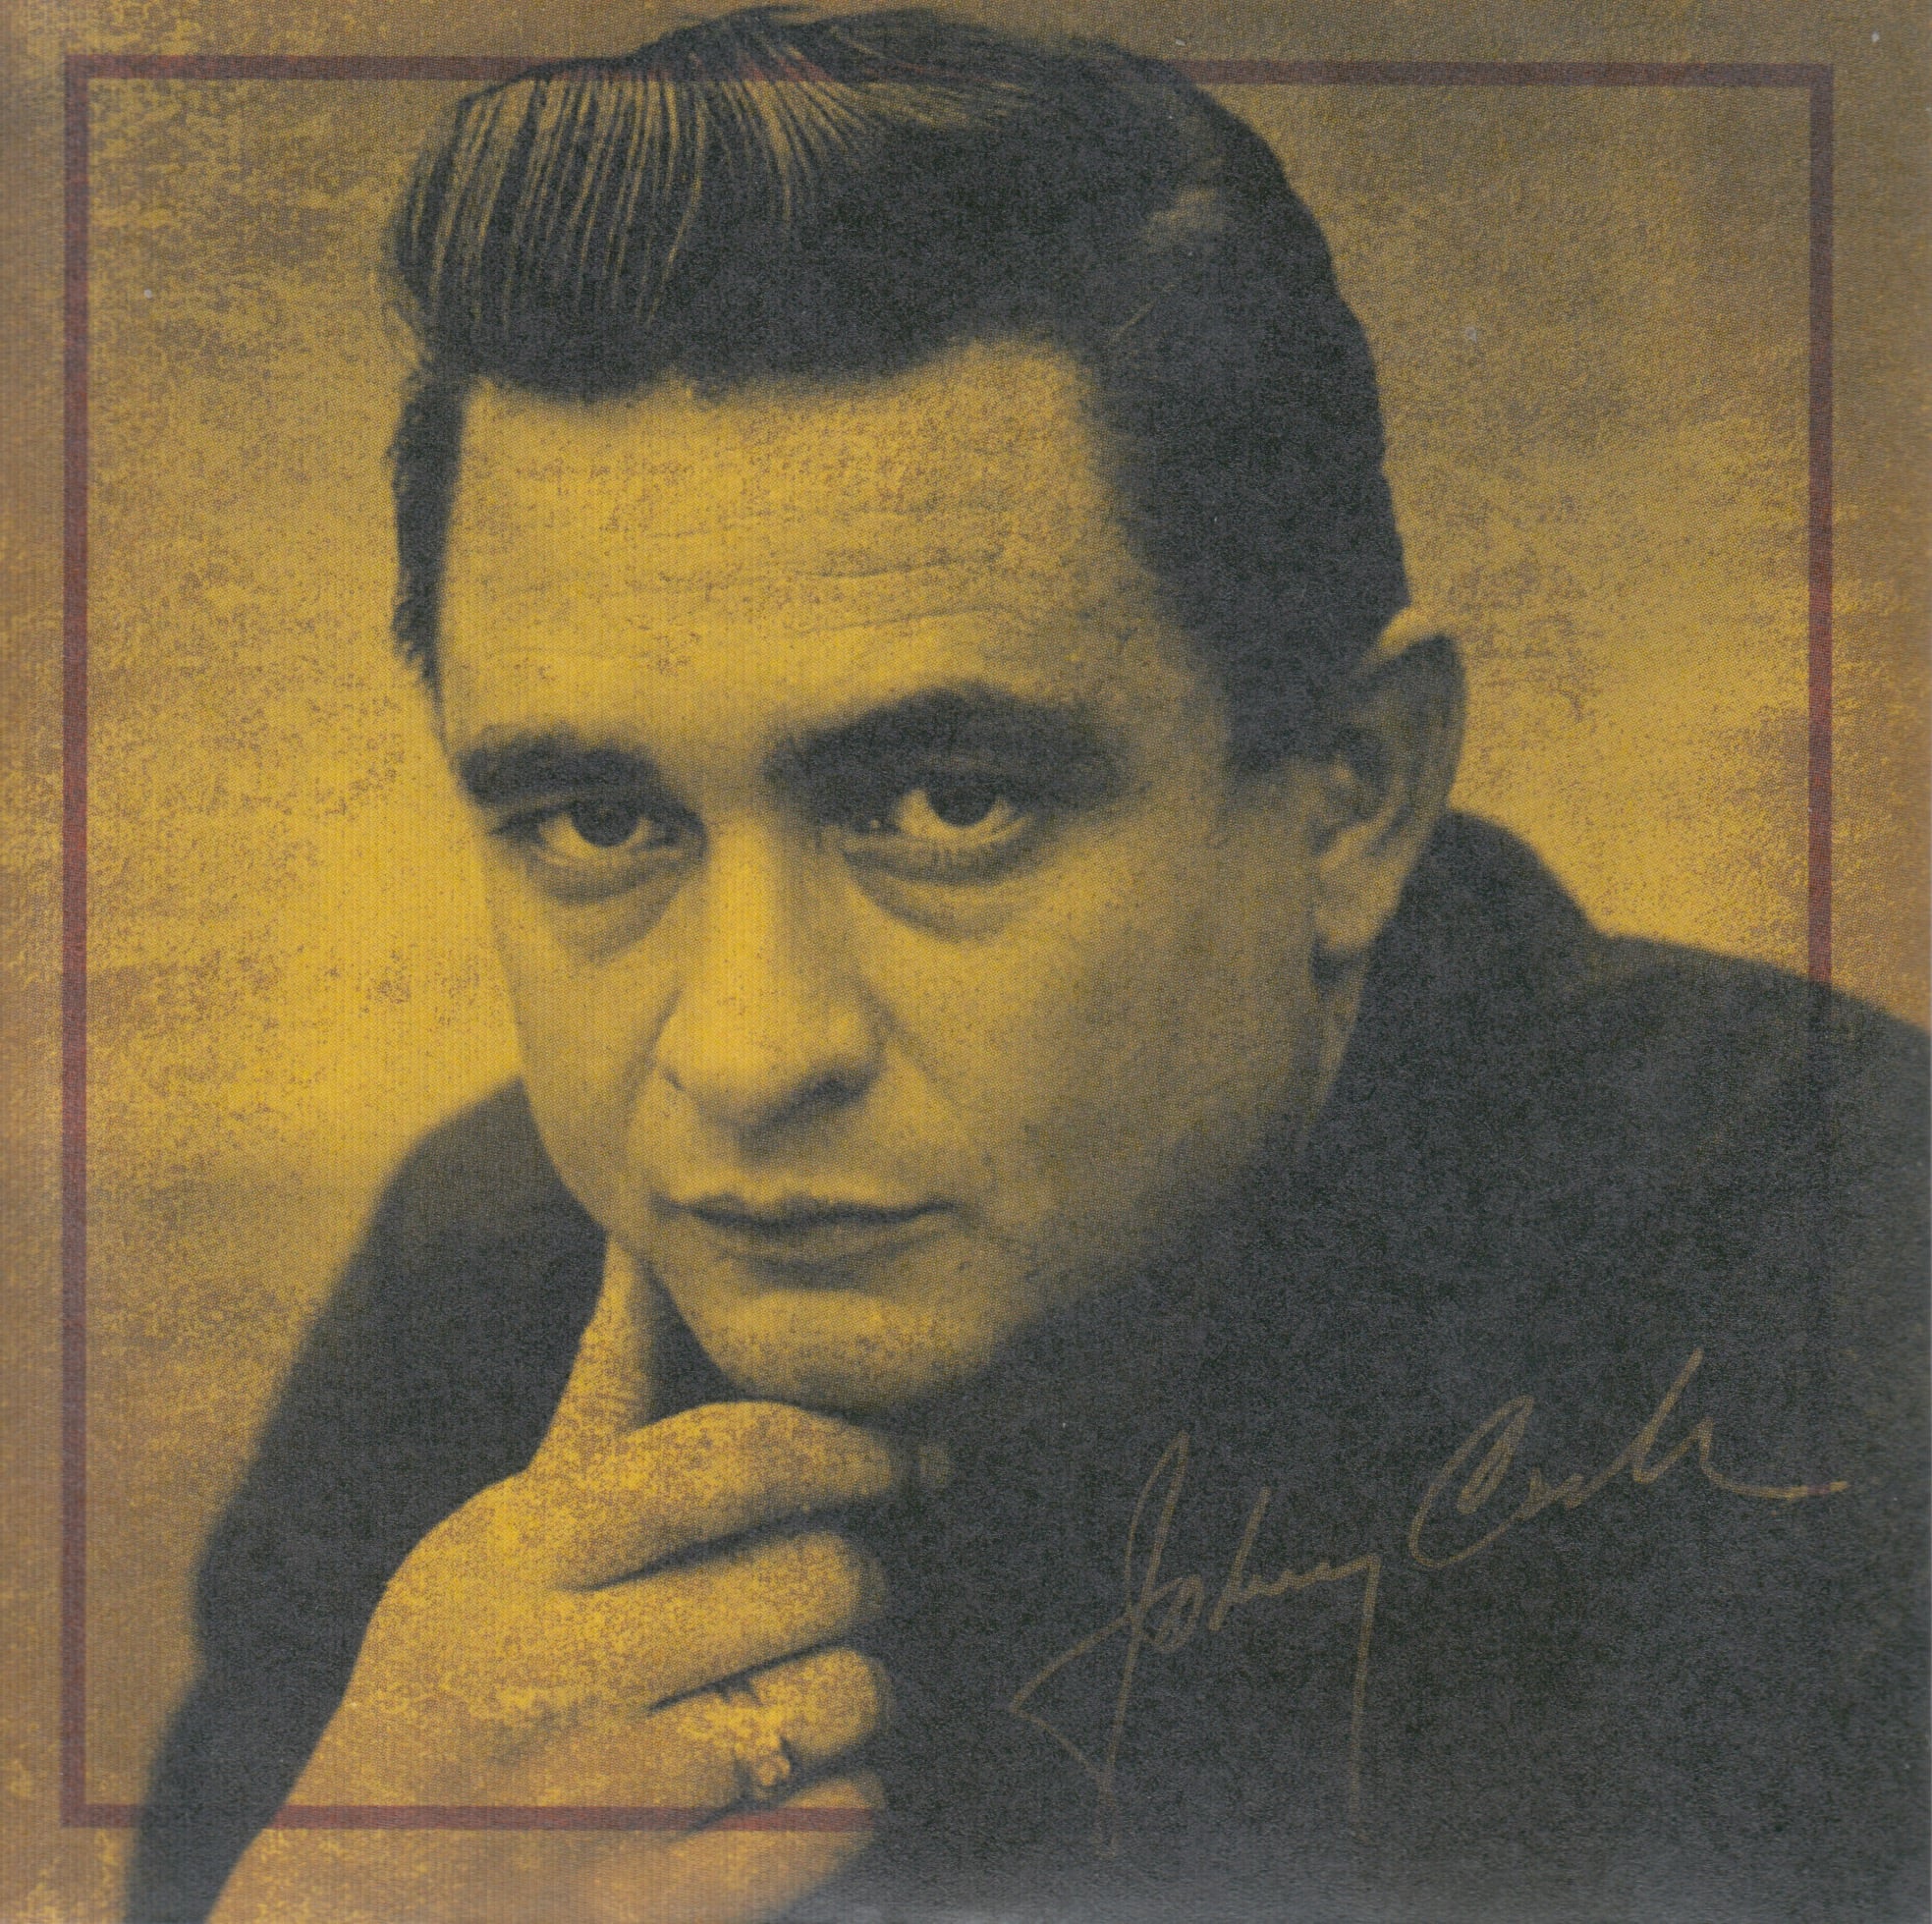 Sun-Records---Johnny-Cash-3-Inch-Single---Cry-Cry-Cry